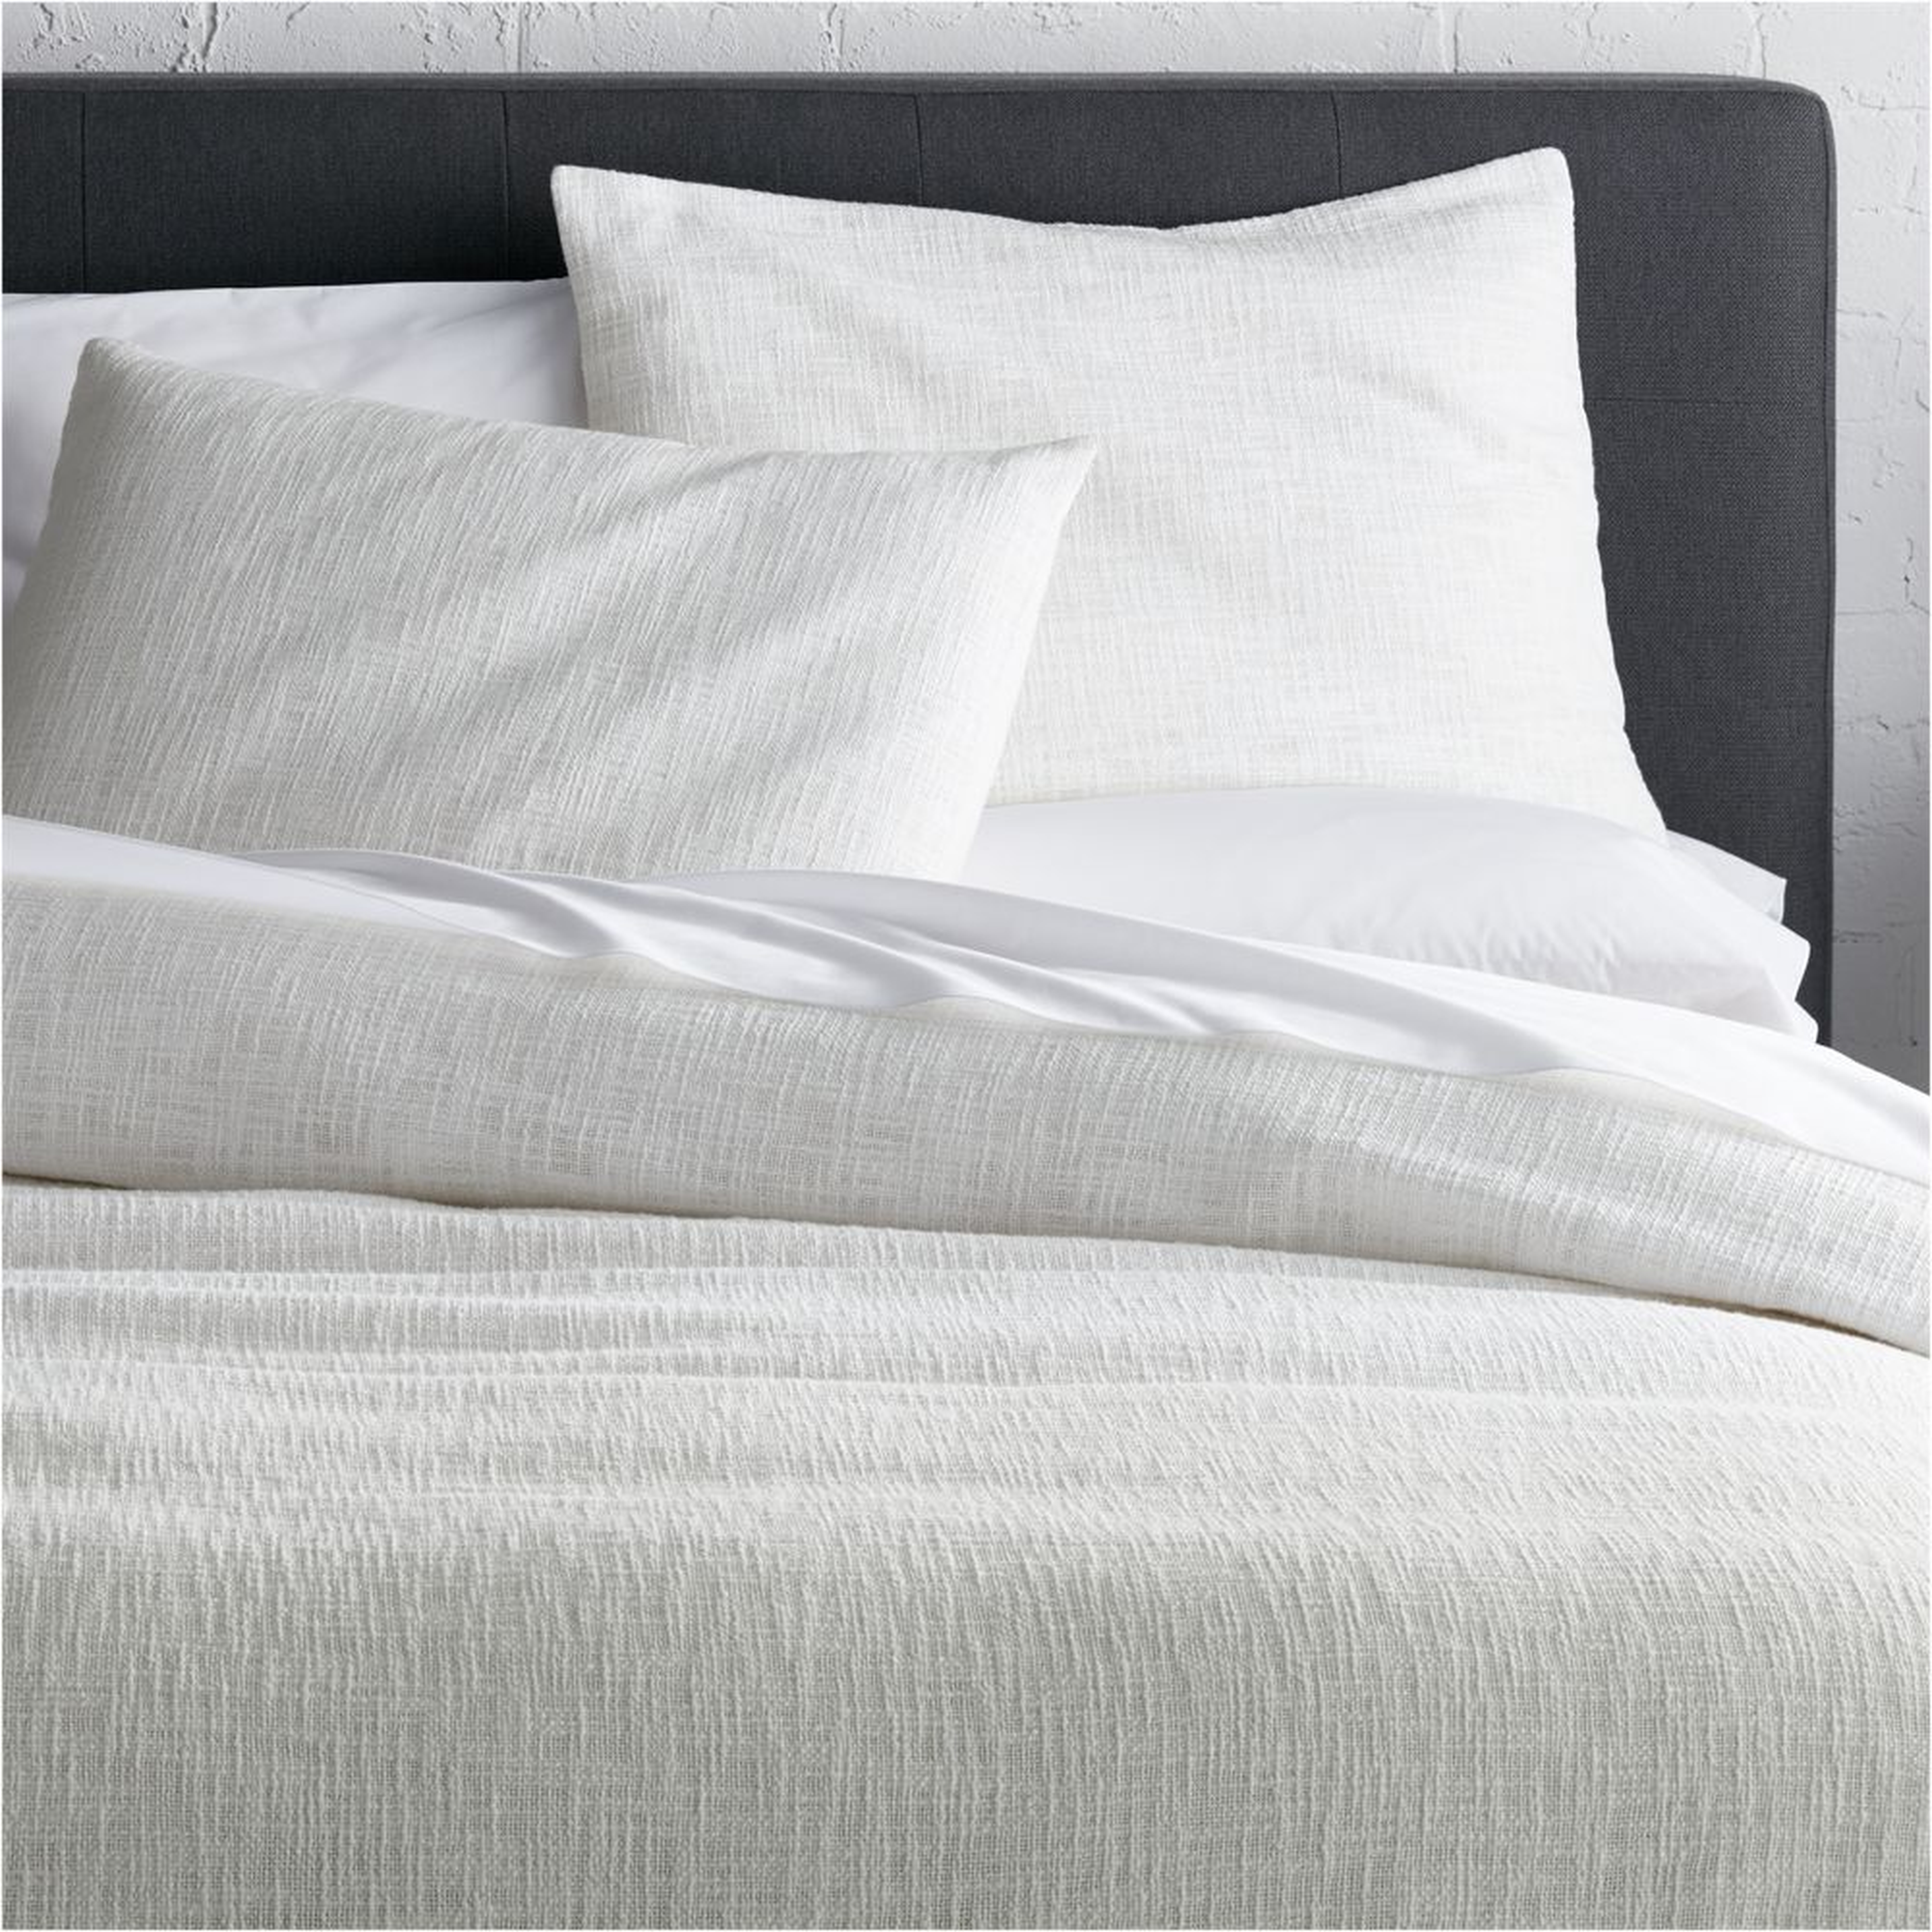 Lindstrom White King Duvet Cover - Crate and Barrel